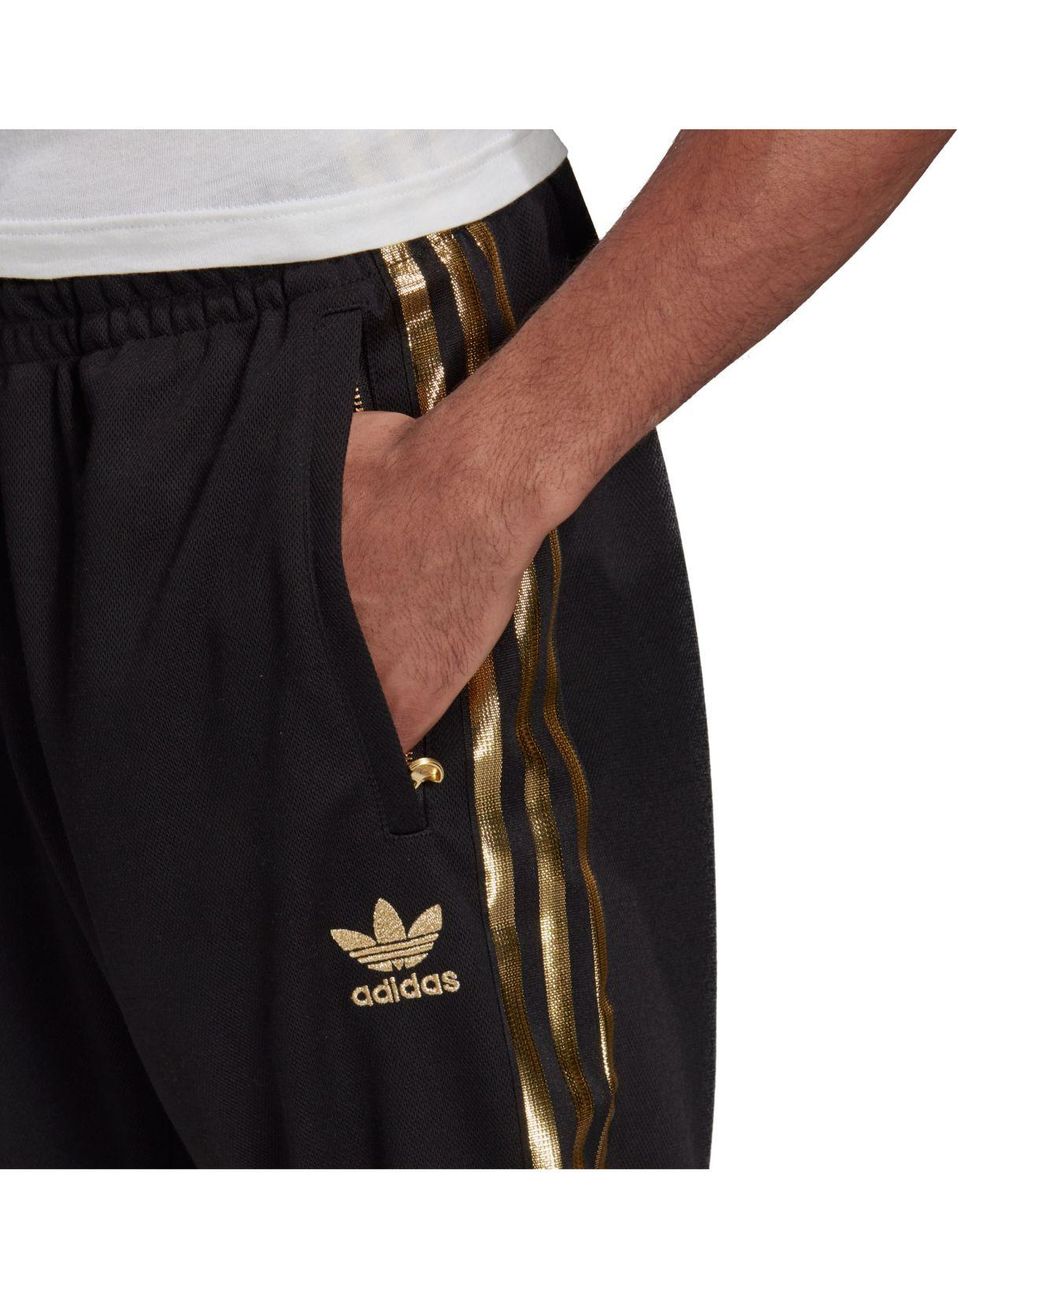 adidas Synthetic Sst 24k Track Pants in Black/Gold (Black) for Men | Lyst